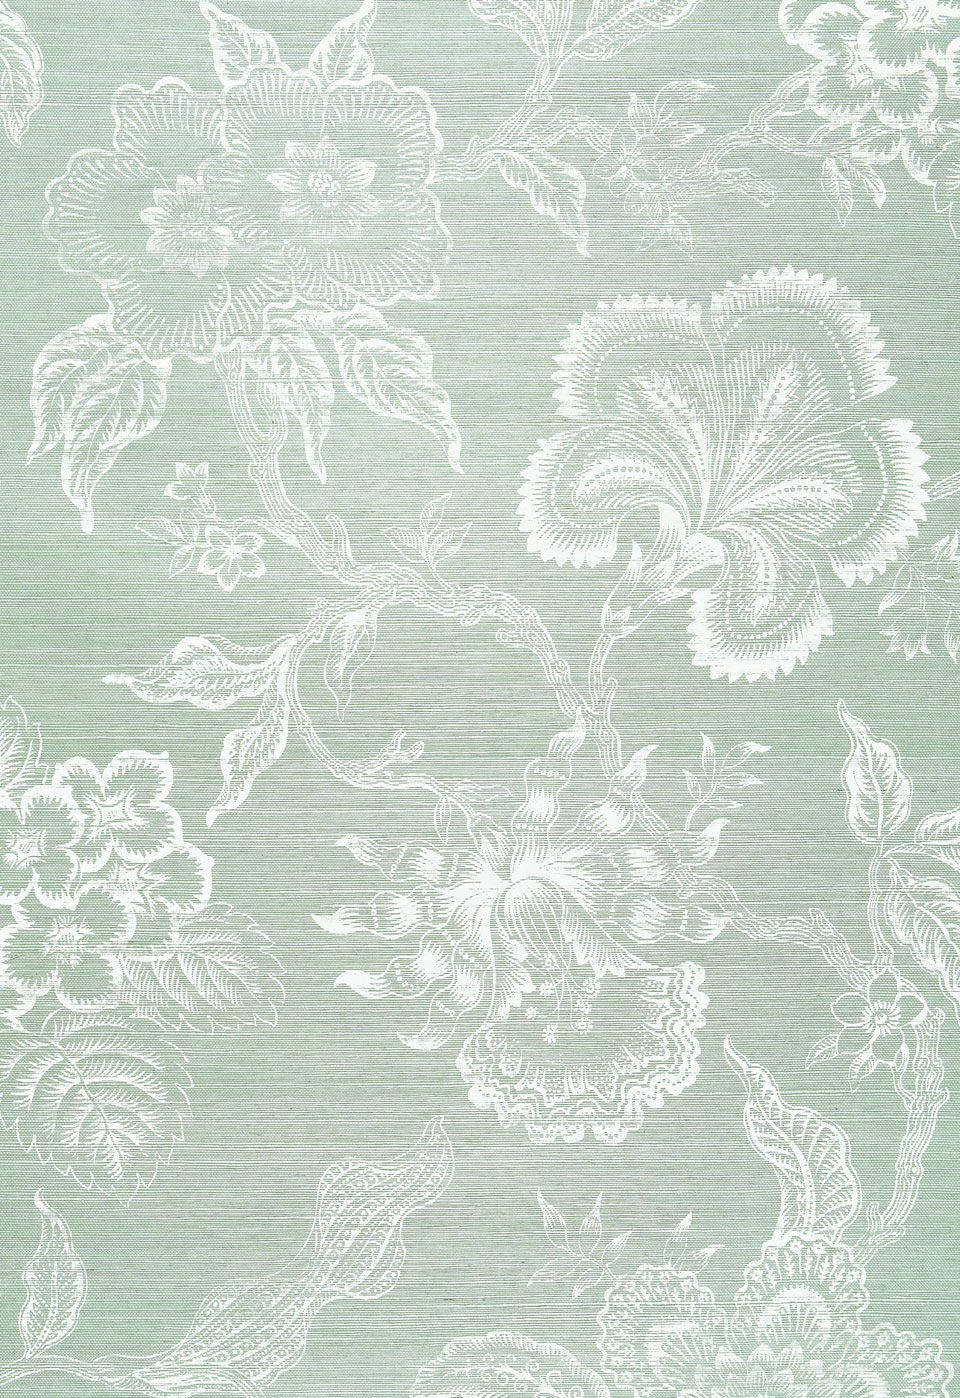 Stylebeat Celerie Kemble Launches Wallpaper With Schumacher